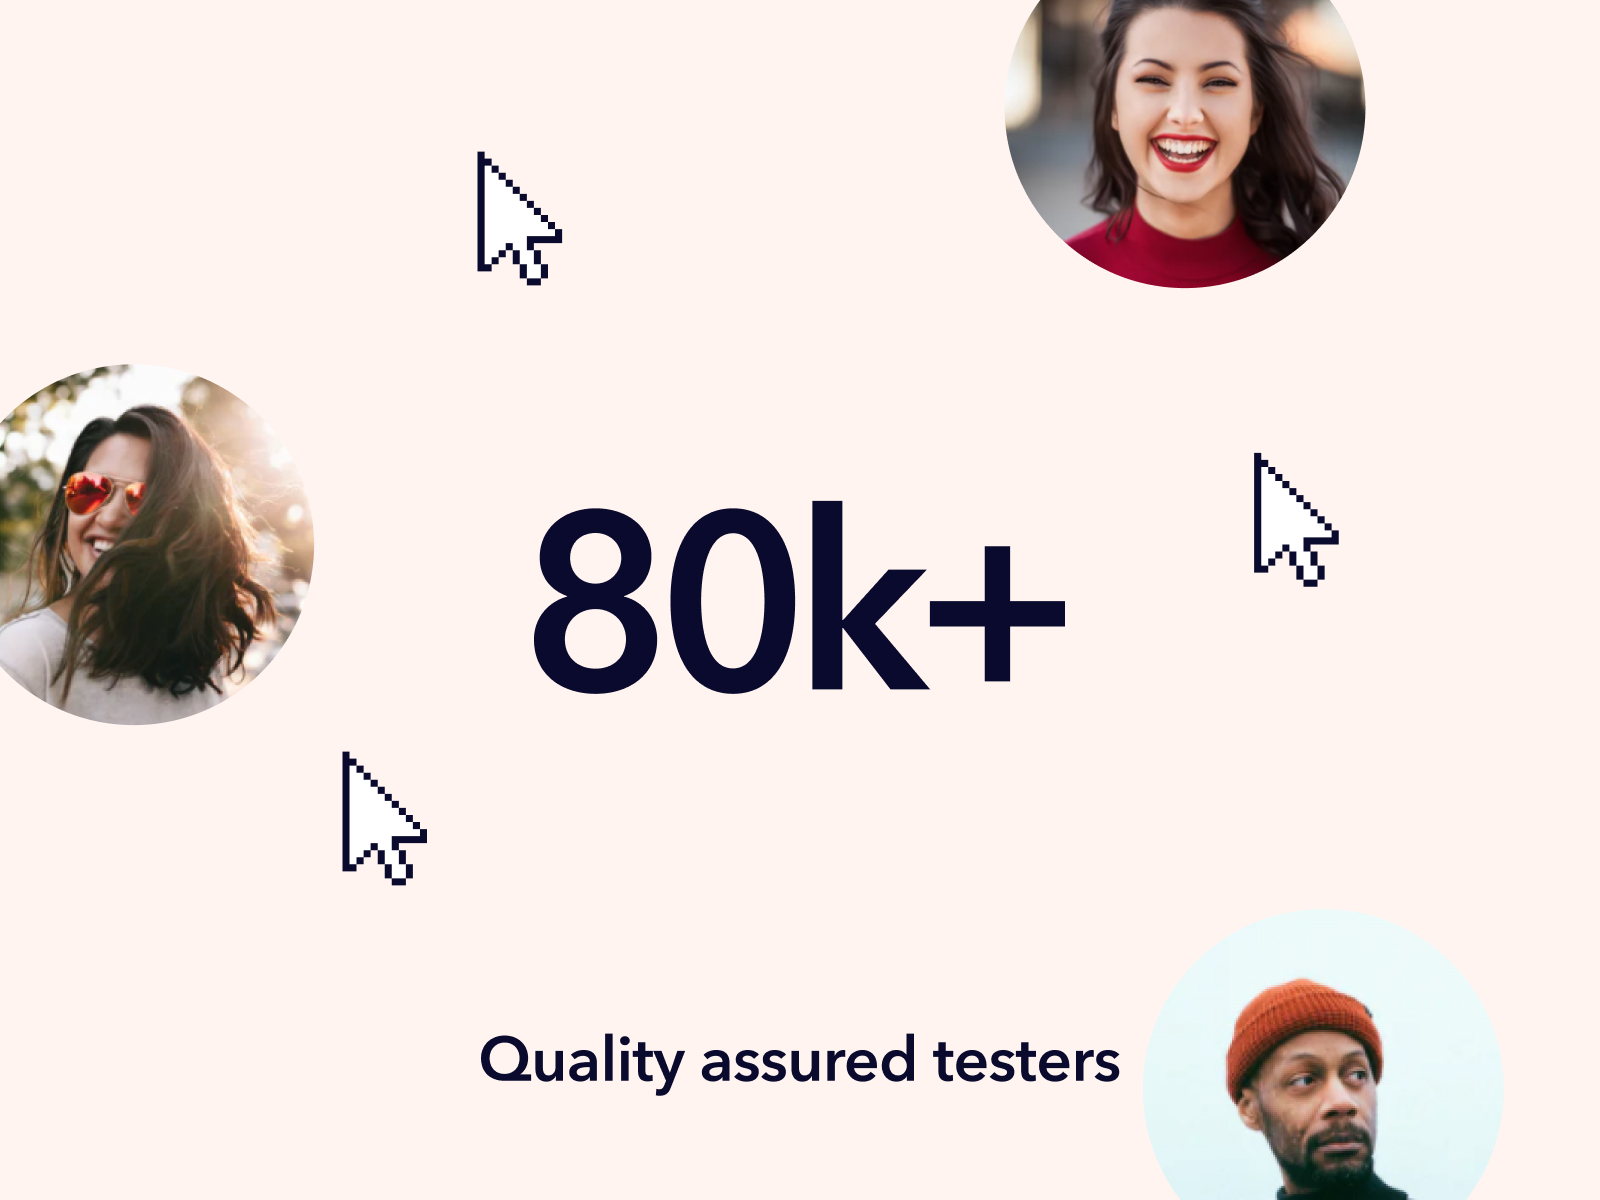 More than 80k+ Quality Assured Testers